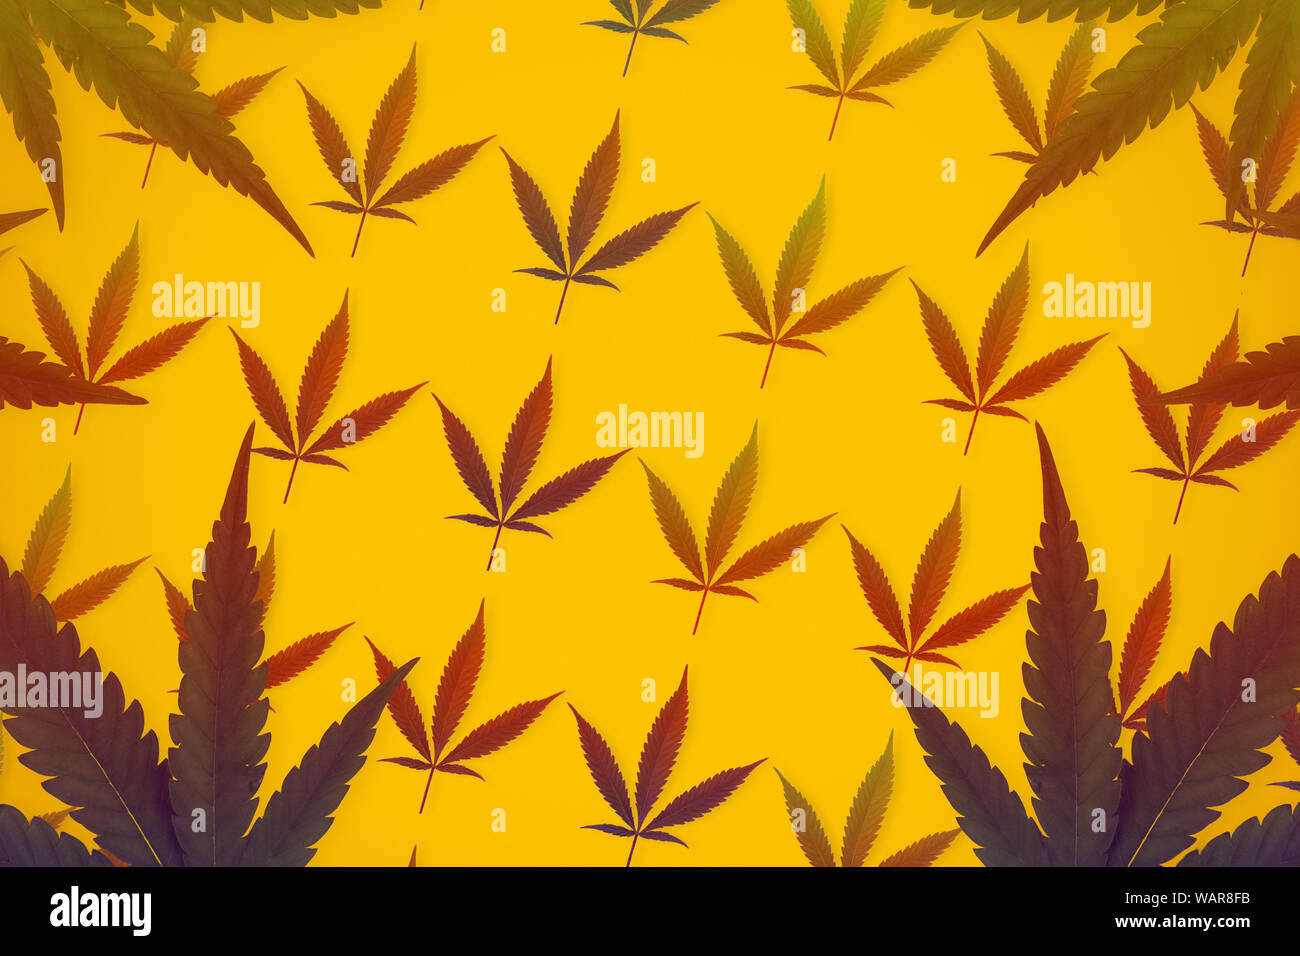 Toned cannabis sativa leafs forming a pattern Isolated on orange background Stock Photo